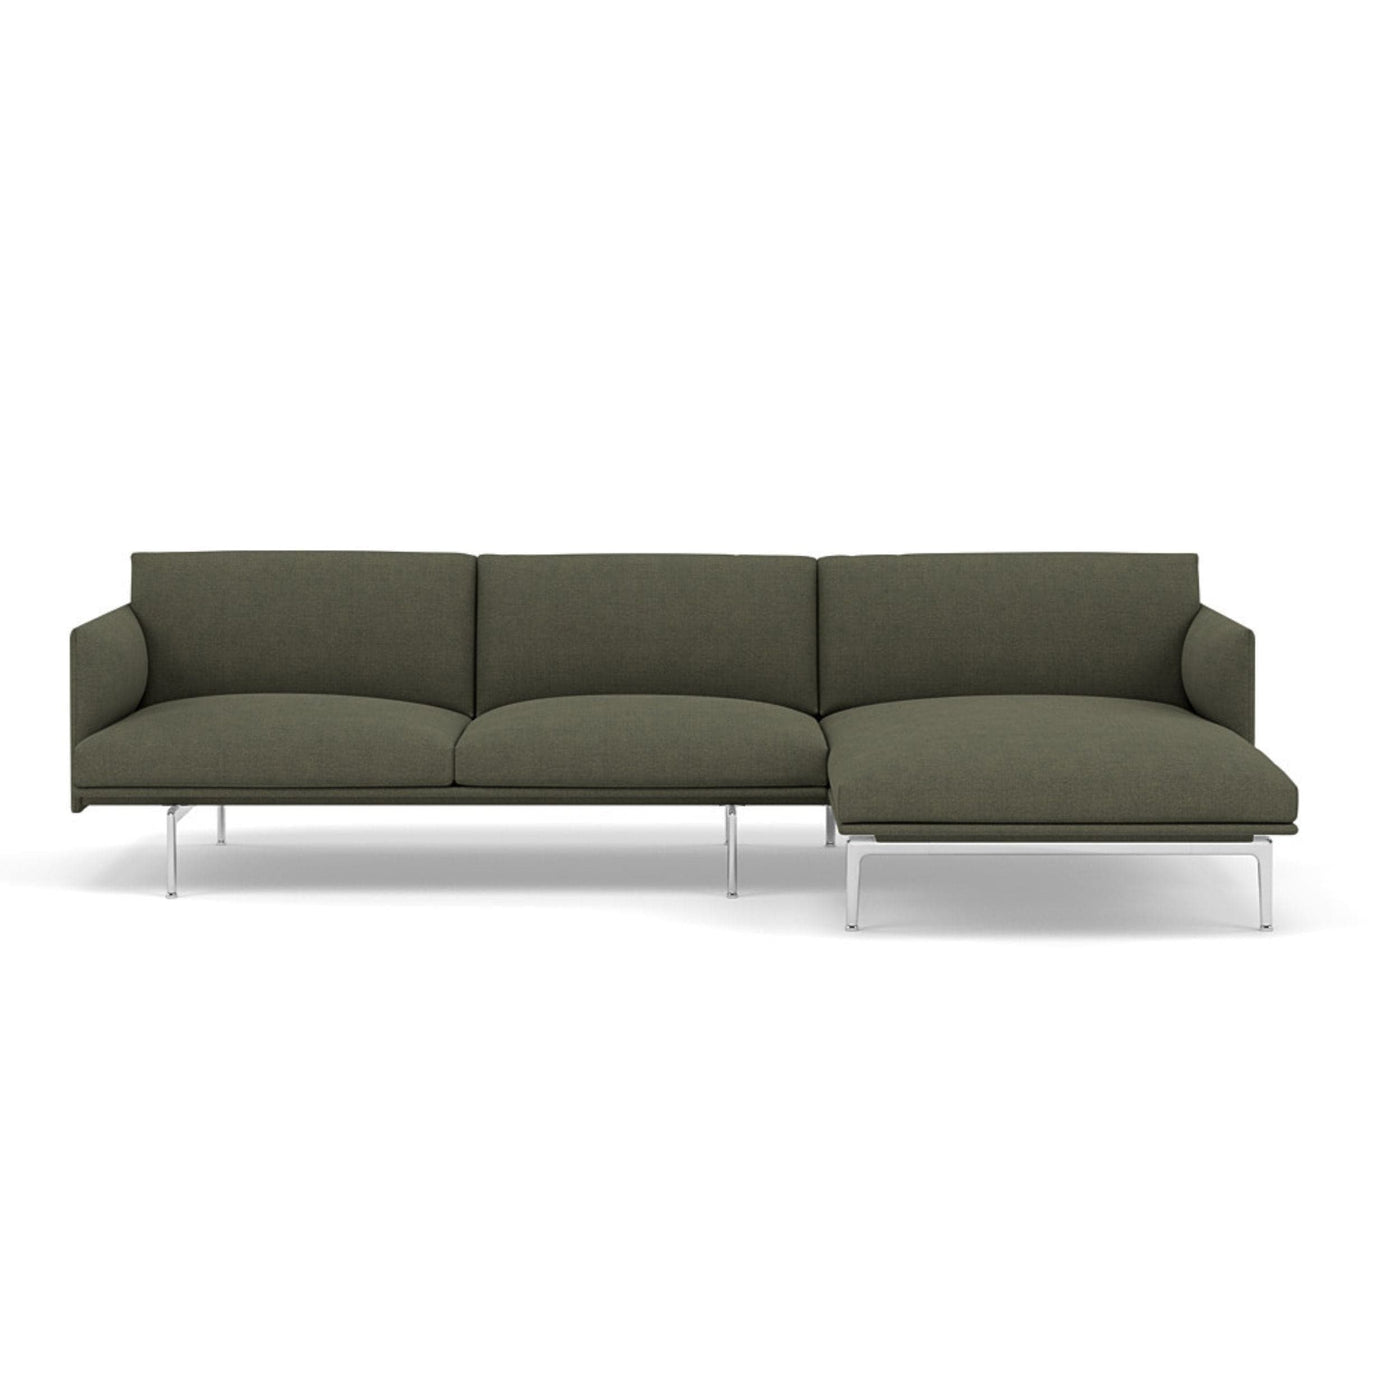 Muuto Outline Chaise Longue sofa in fiord 961. Made to order from someday designs. #colour_fiord-961